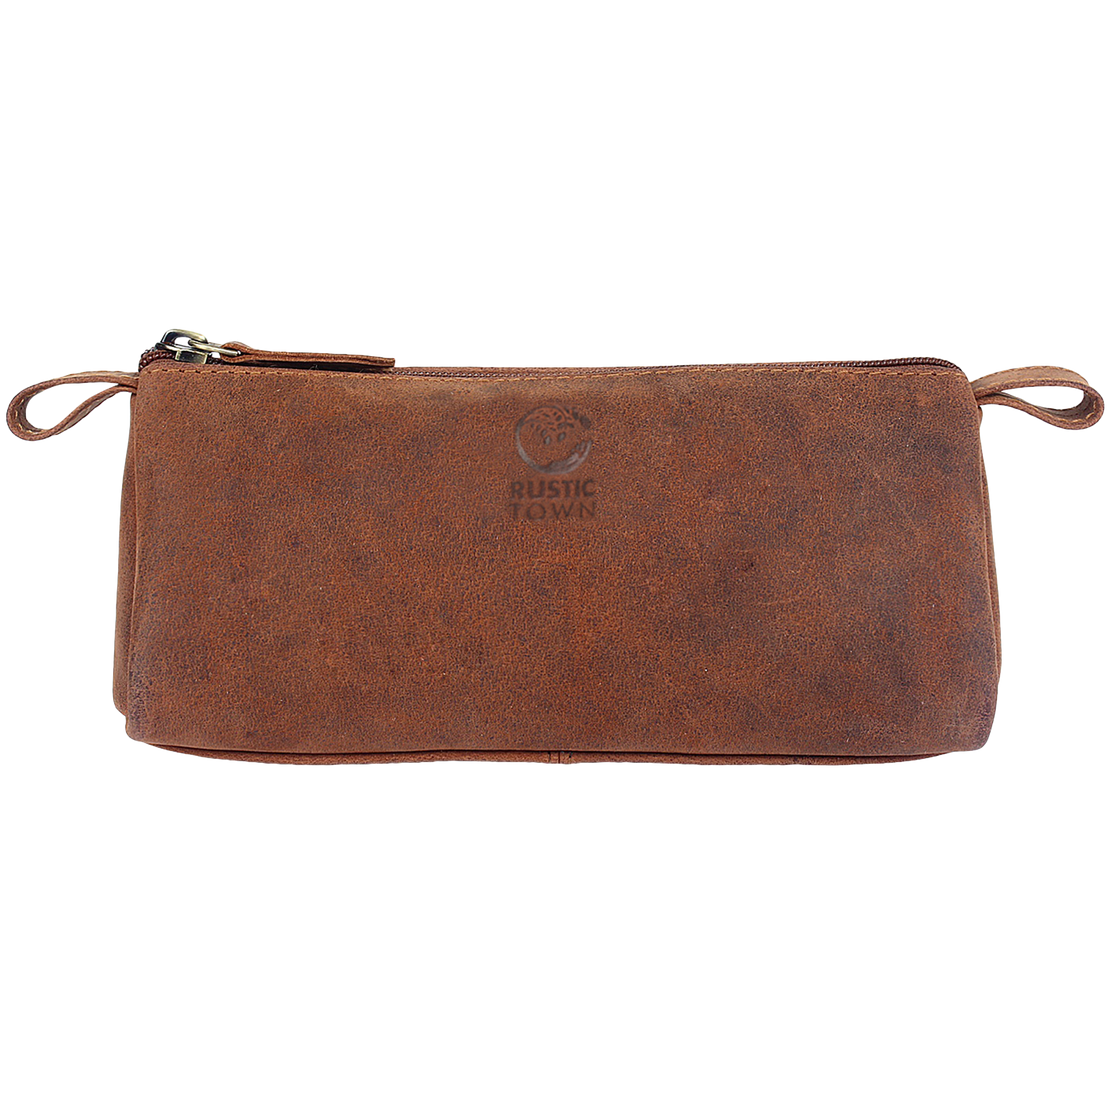 Tom Leather Pencil Case - Zippered Pen Pouch for School, Work & Office  (Brown) – Rustic Town